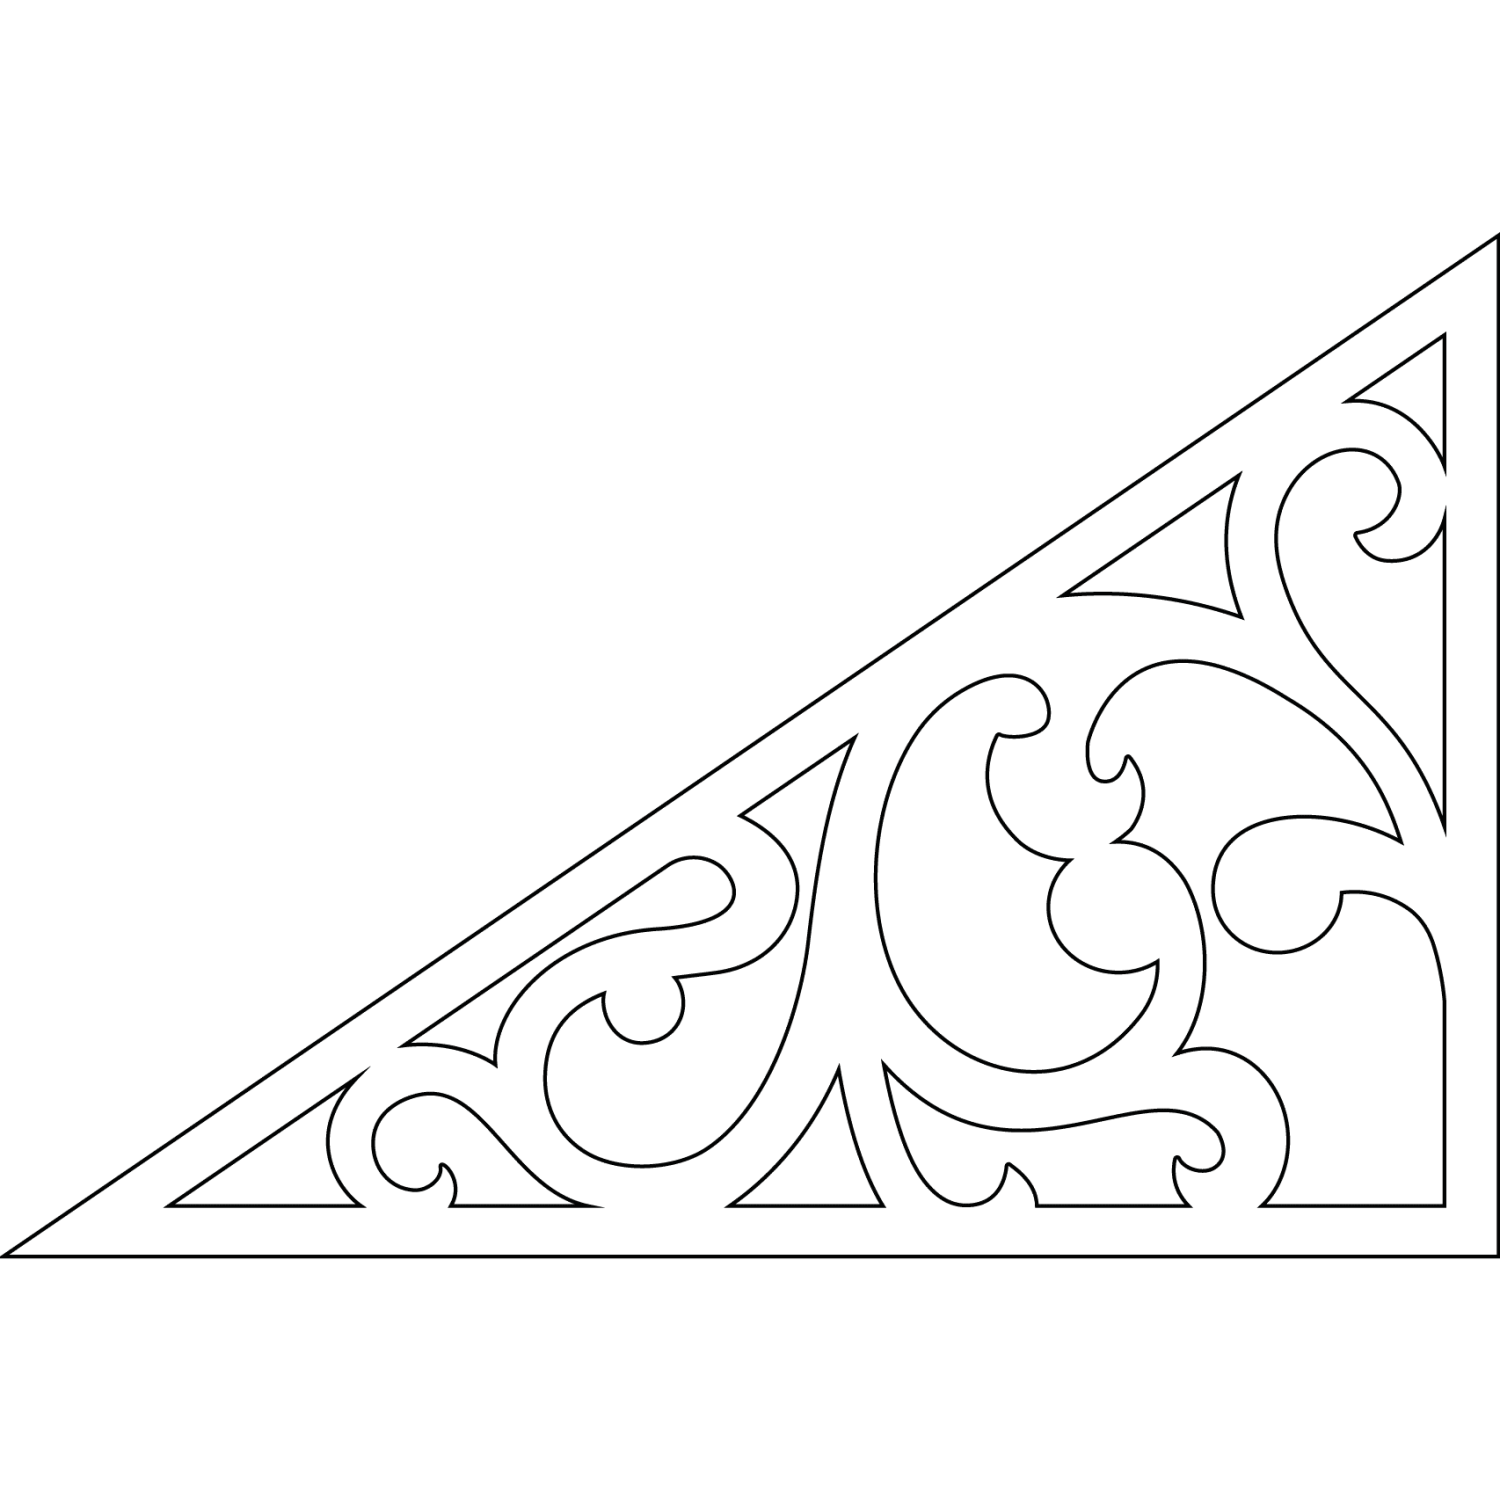 Gable infill 090 - Outline of a decorative victorian millwork as house decoration for roof and gable end